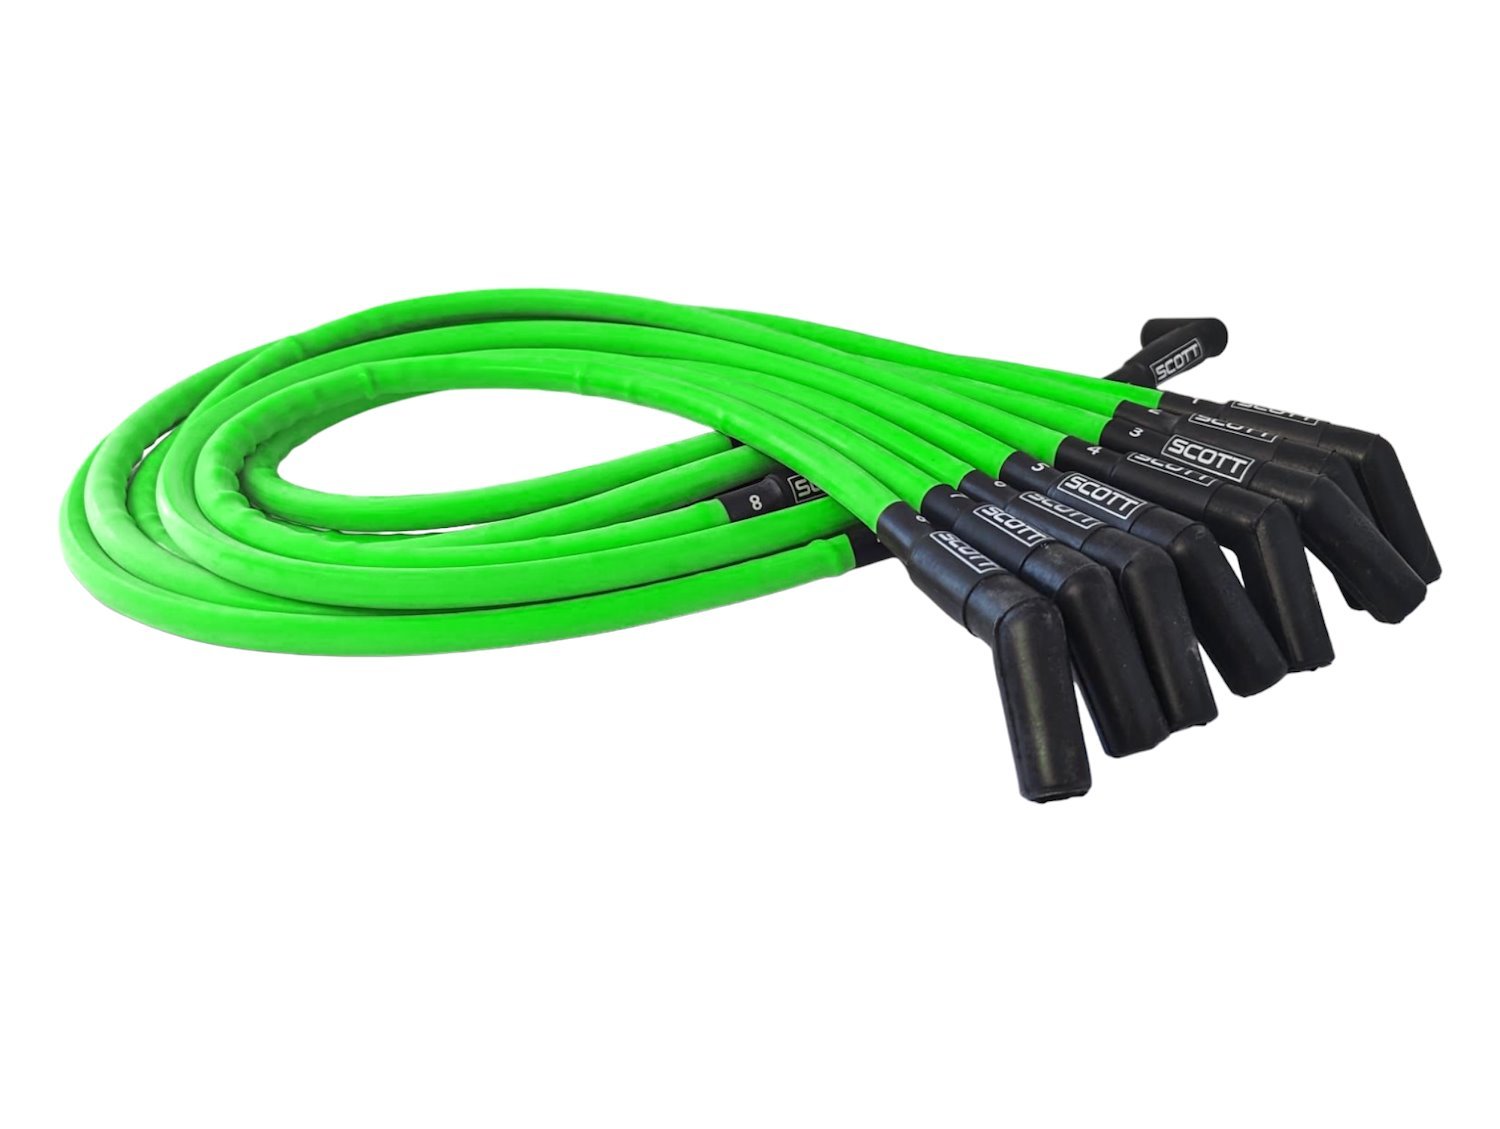 SPW300-CH-429-8 Super Mag Fiberglass-Oversleeved Spark Plug Wire Set for Big Block Ford, Over Valve Cover [Green]